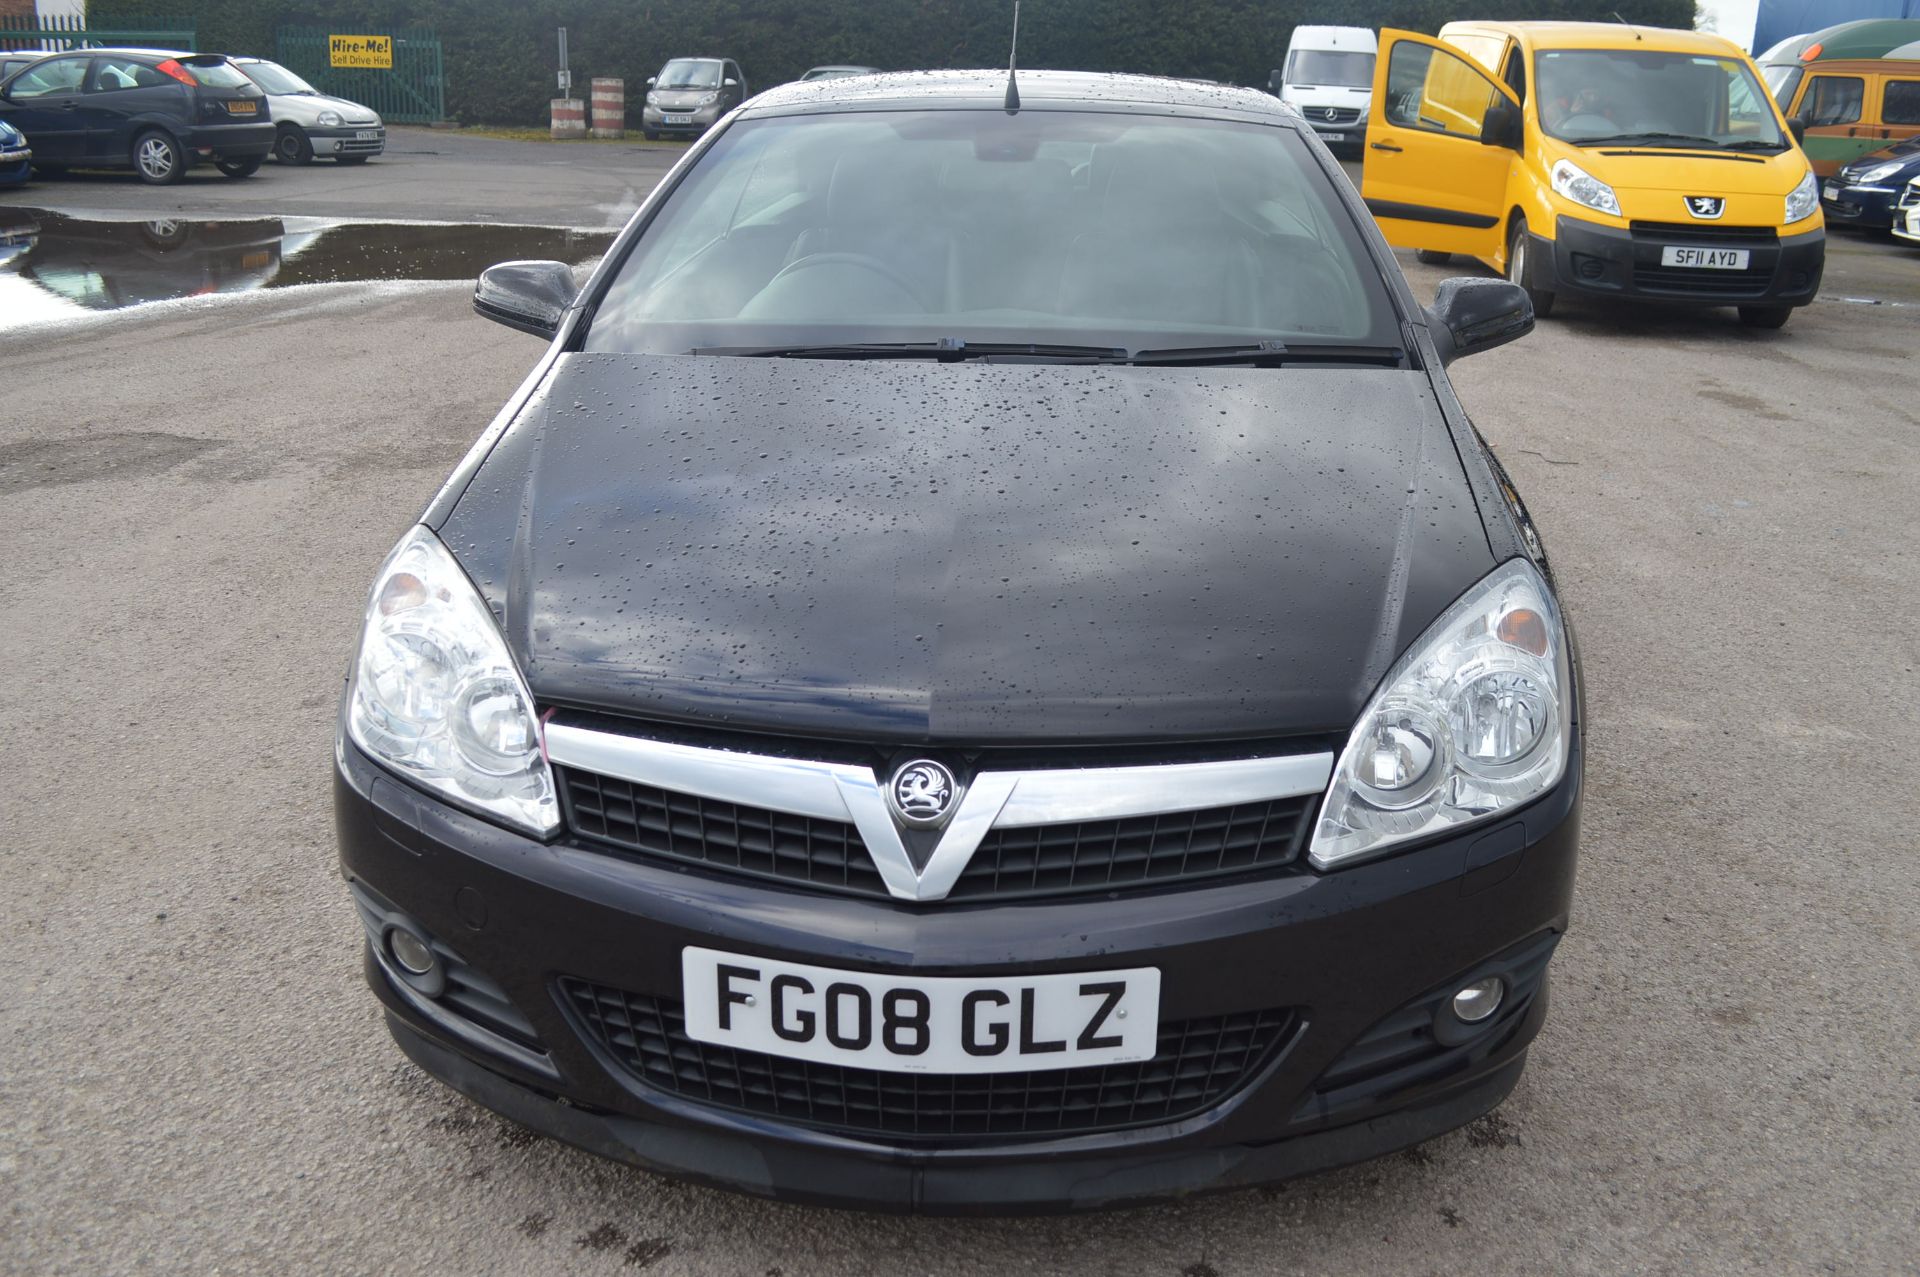 K - 2008/08 REG VAUXHALL ASTRA T-TOP DESIGN CDTI - ROOF CAN BE PUT DOWN/UP WITH THE KEY   DATE OF - Image 20 of 20